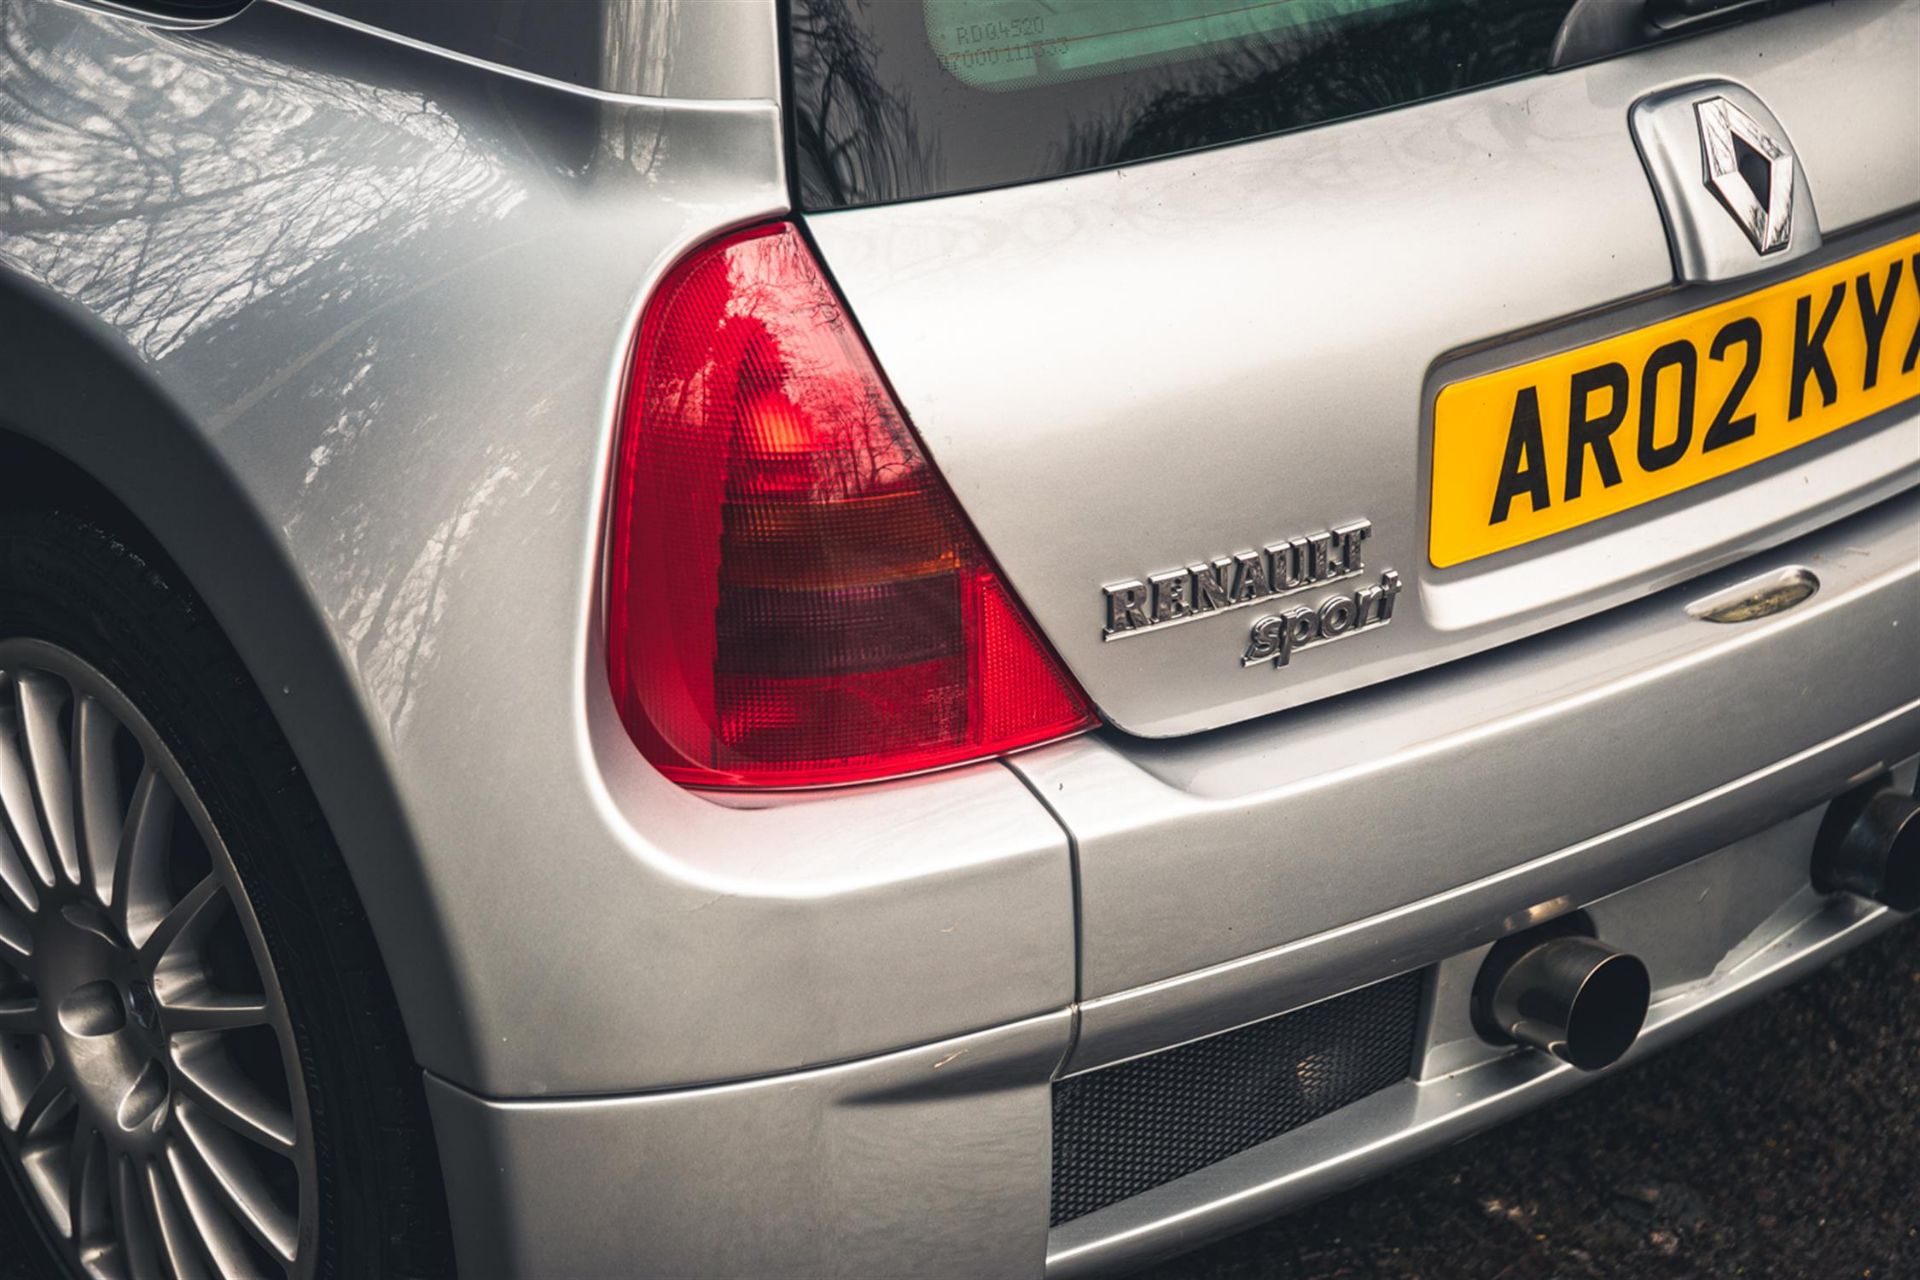 2002 Renault Sport Clio V6 (230) Phase 1 - Image 9 of 10